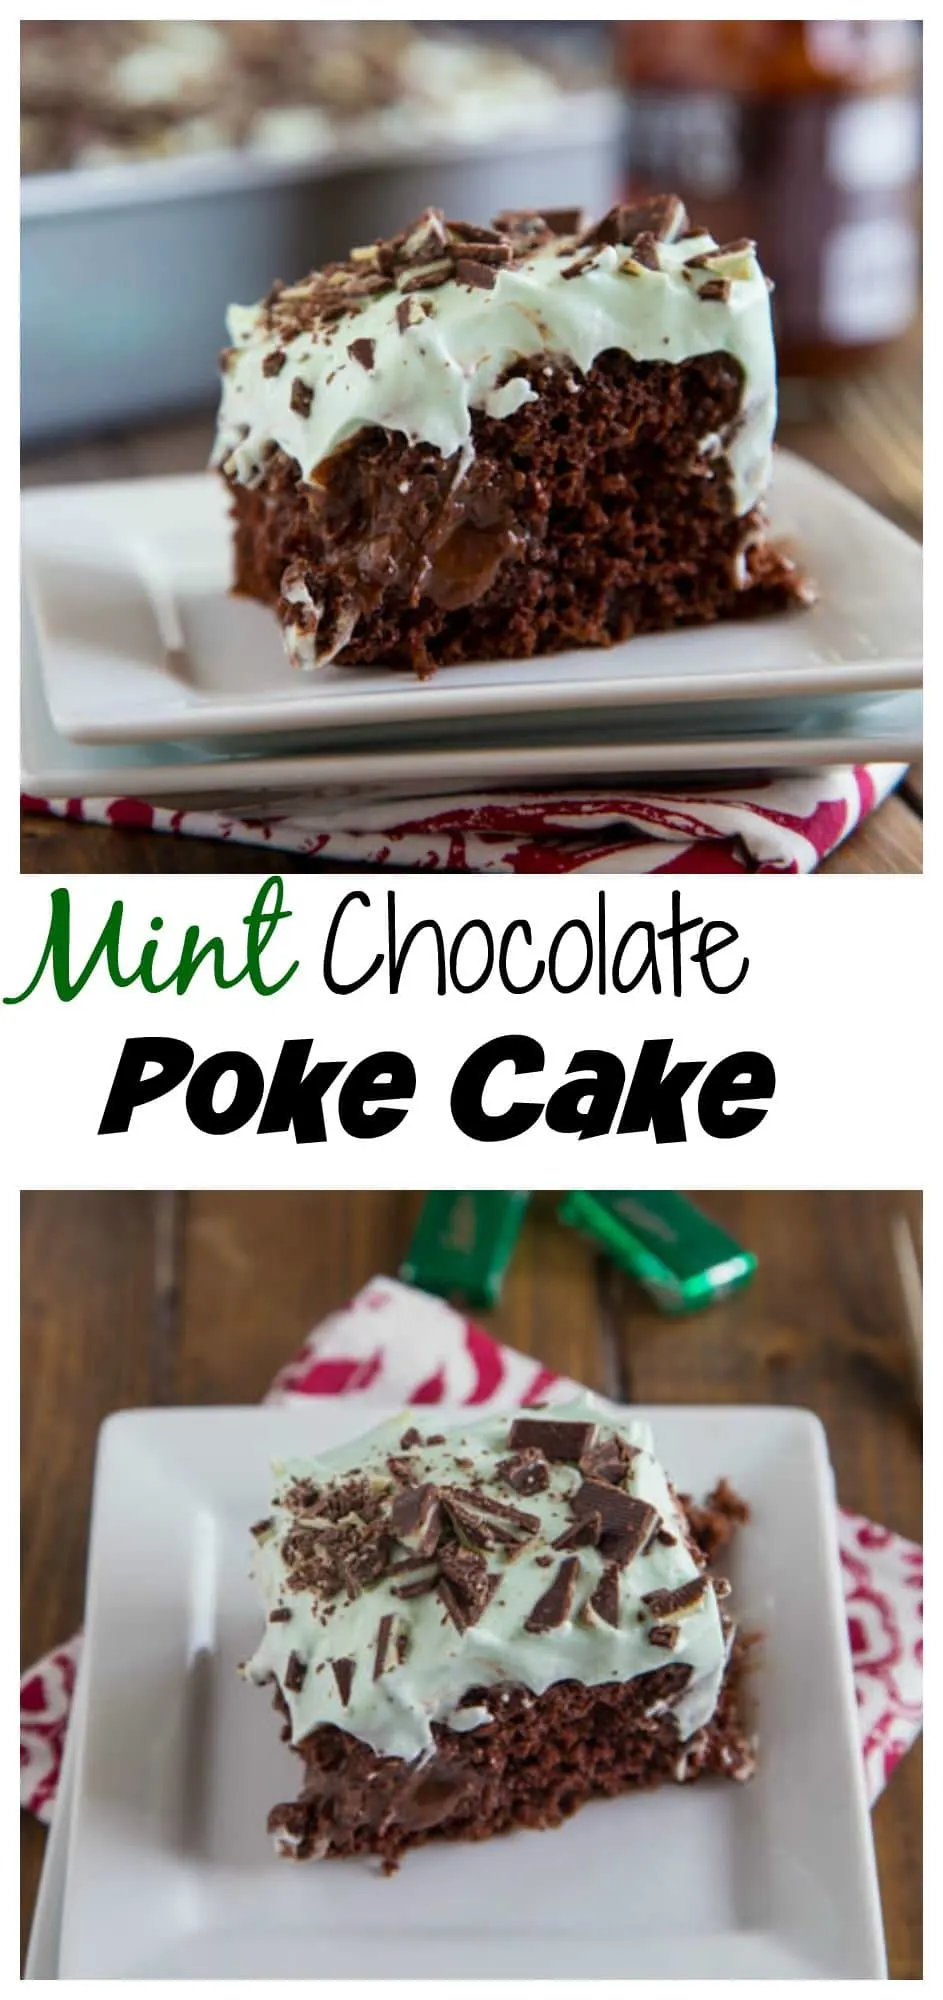 Mint Chocolate Poke Cake - moist chocolate cake covered with hot fudge, chocolate pudding and then topped with mint whipped cream.  A chocolate and mint dream come true!